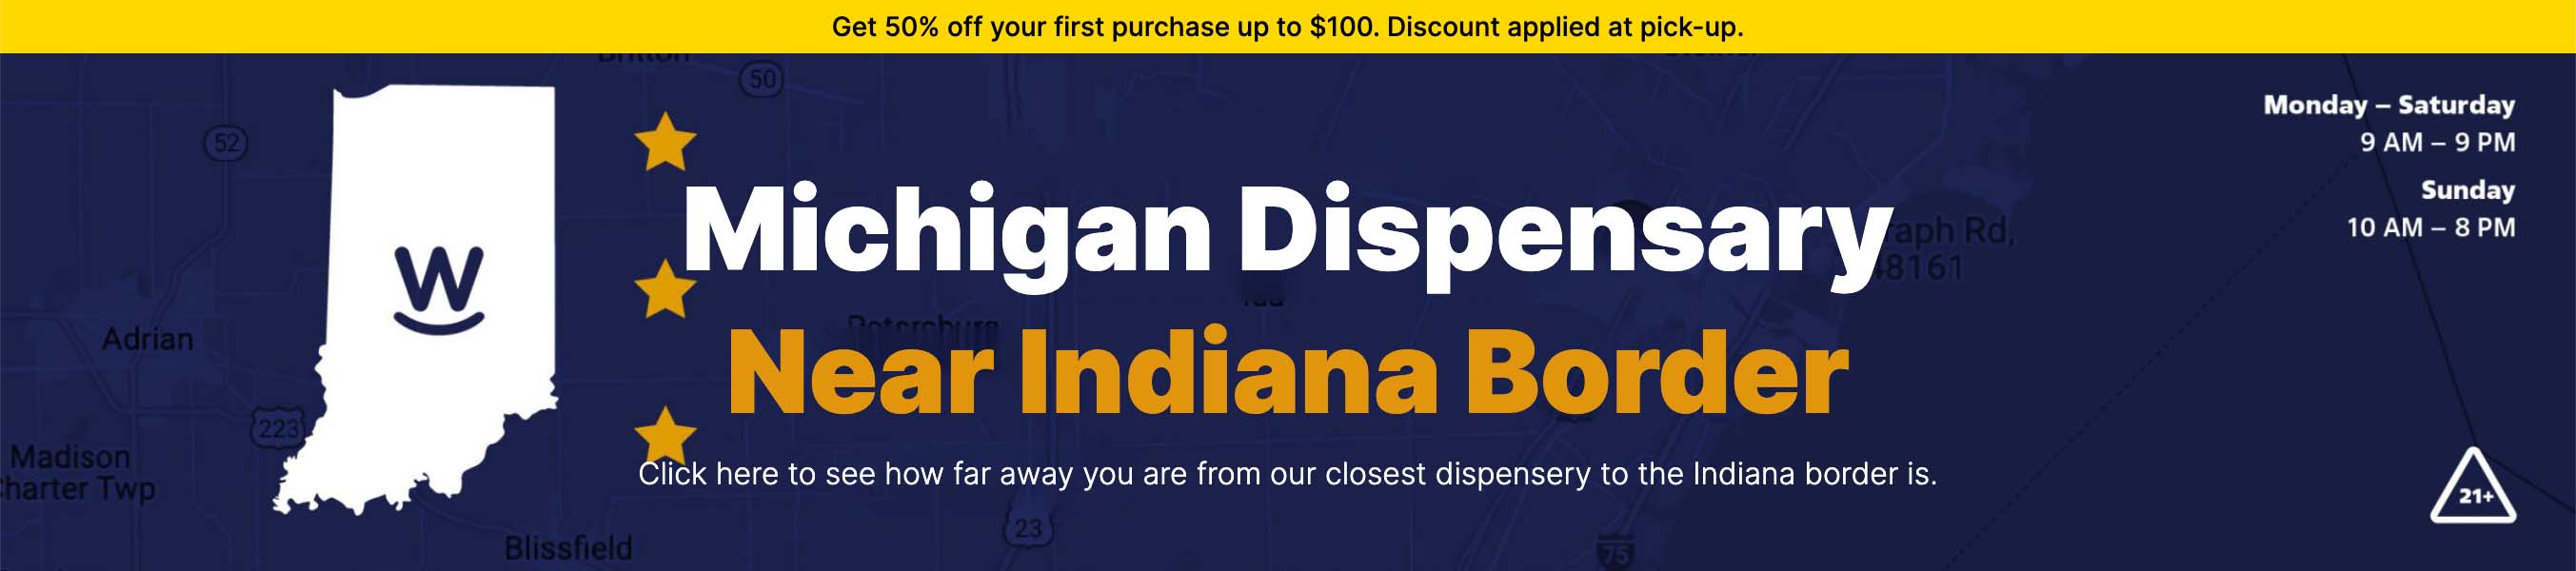 Michigan Dispensary near the Indiana border. Get a 50% discount on your first visit. Click to view map.